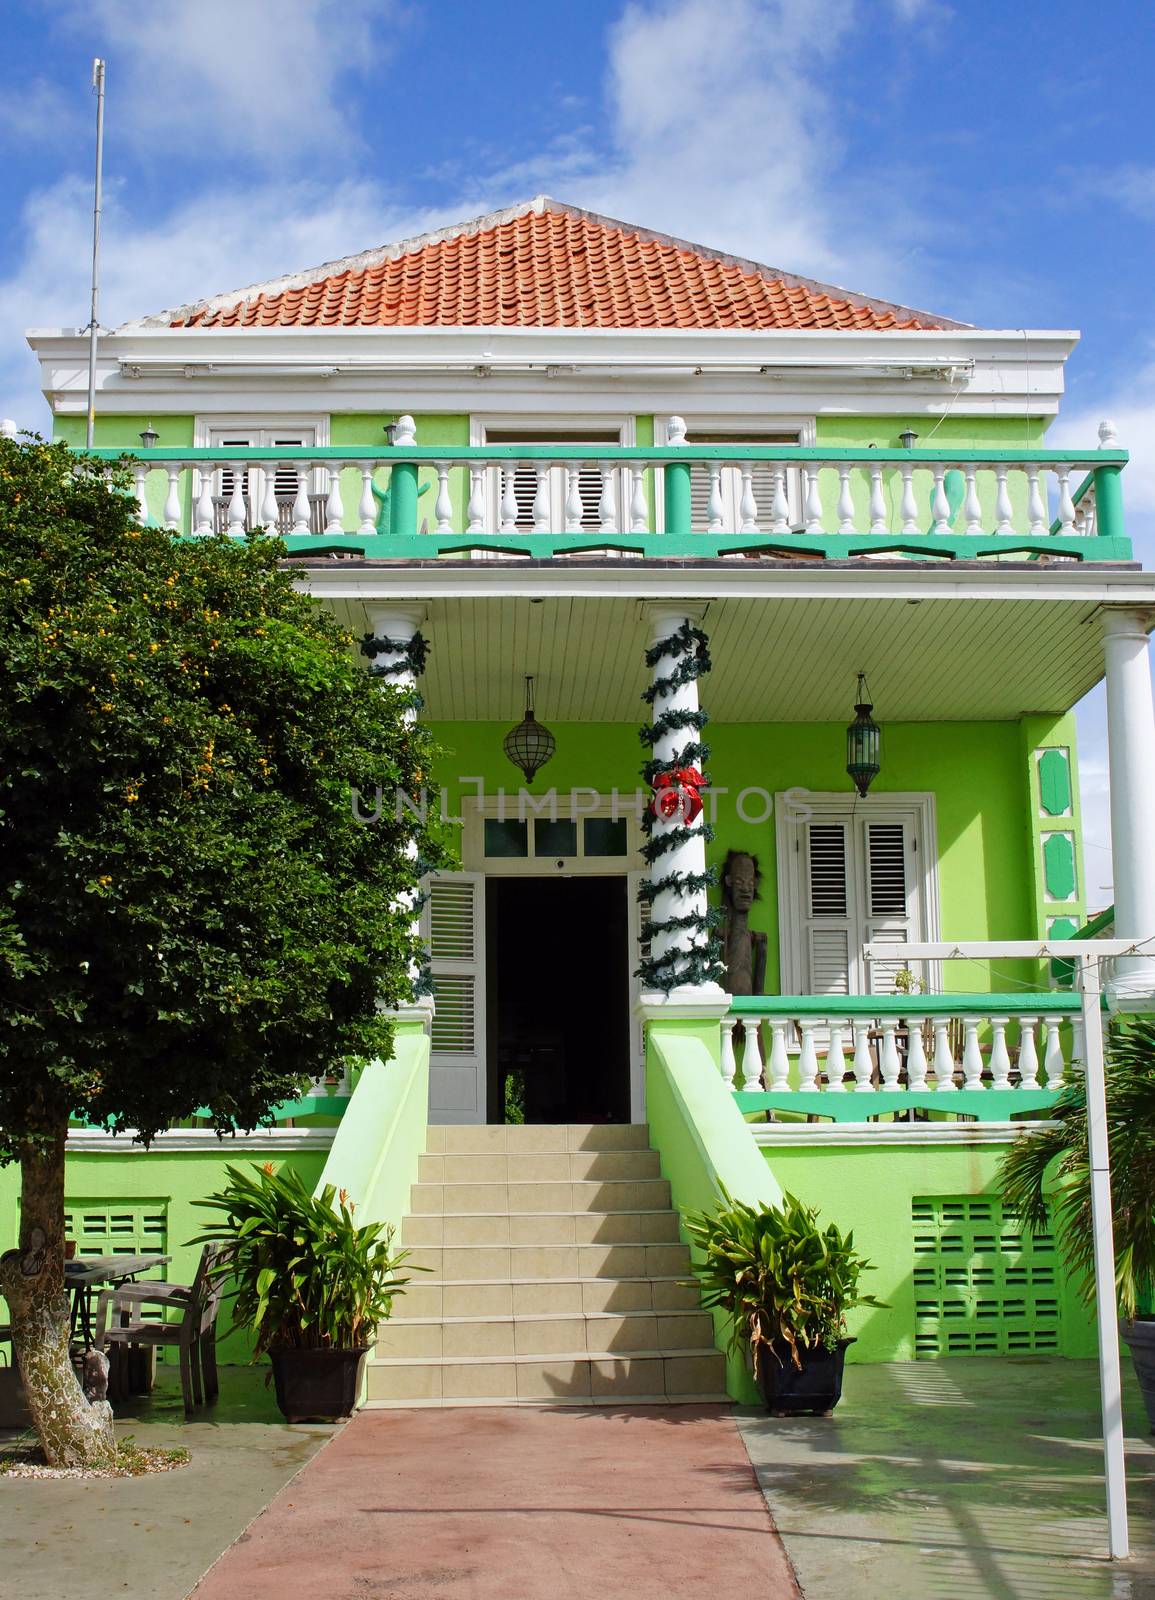 Typical residence in Willemstad, Curacao, ABC Islands